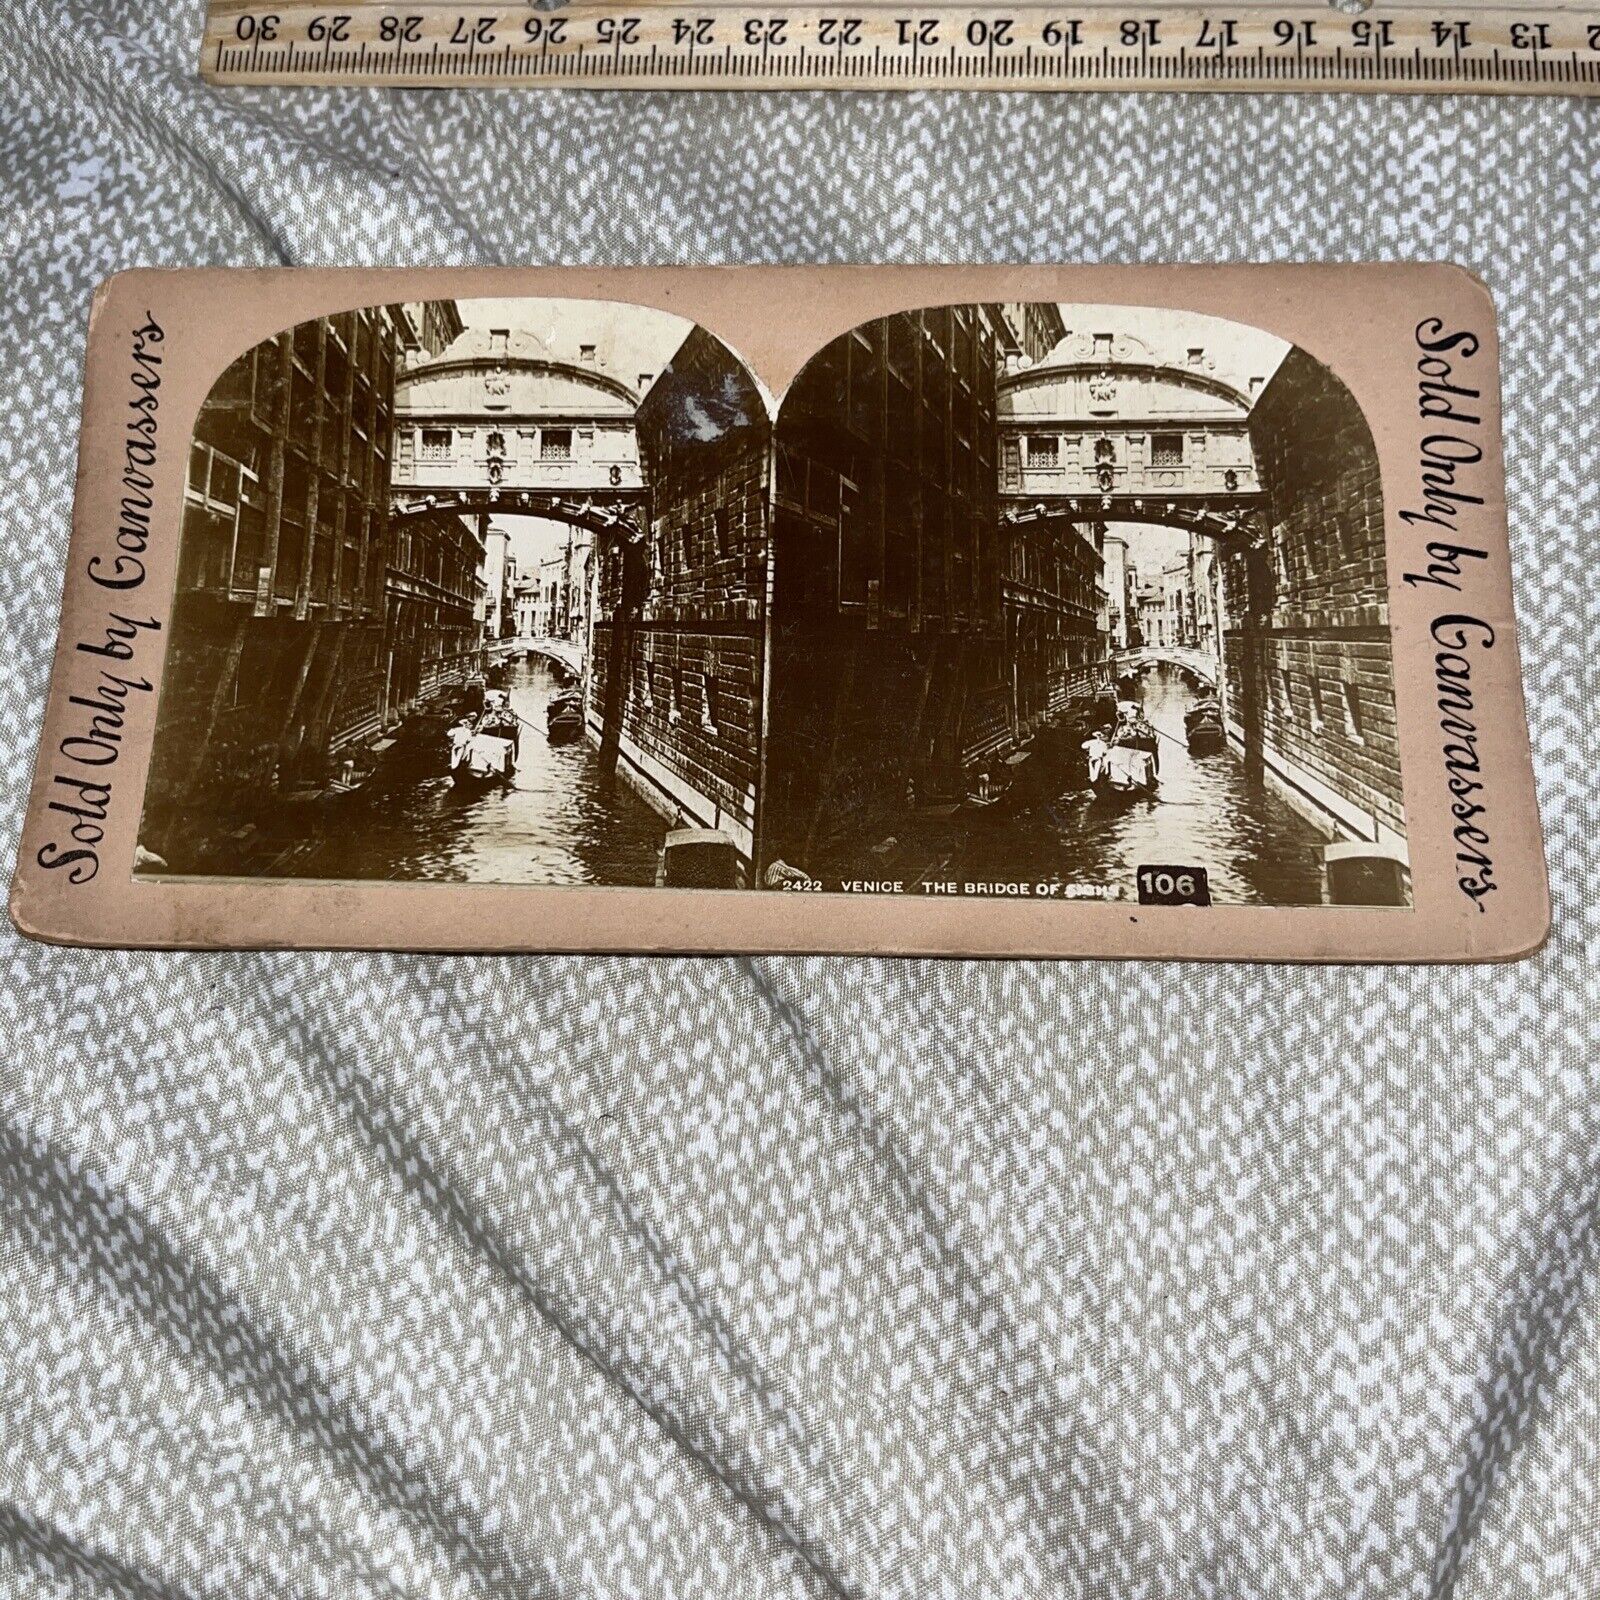 Antique Stereoview Card Photo: Venice The Bridge of Signs Italy Gondola Canal